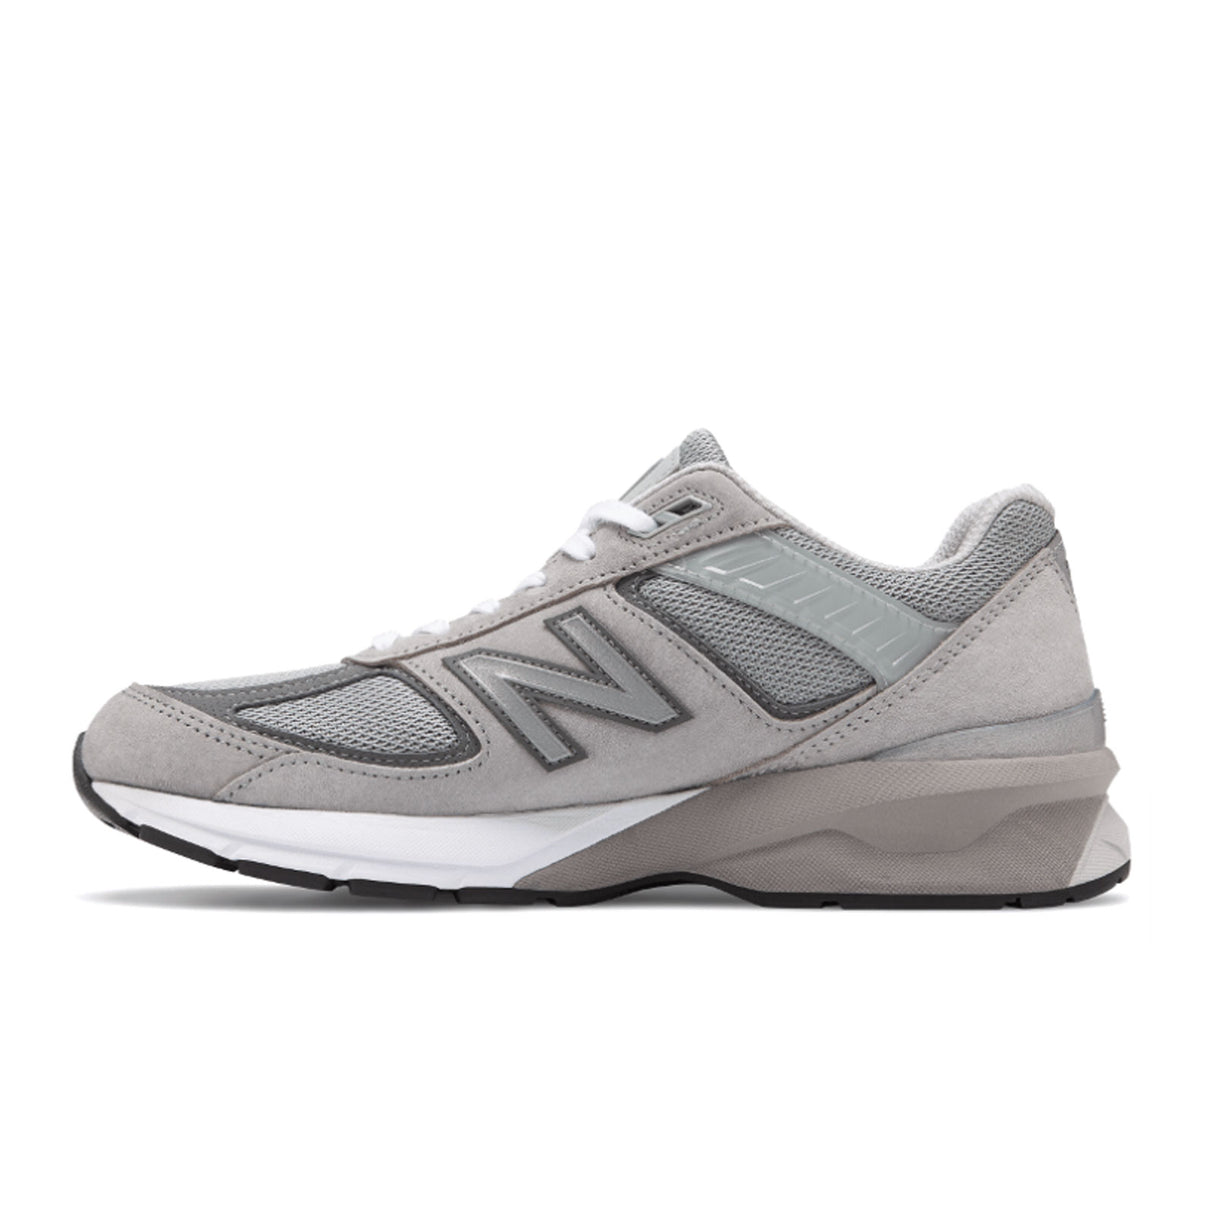 New Balance Made in the USA 990v5  (Men) - Grey/Castlerock Athletic - Running - Stability - The Heel Shoe Fitters